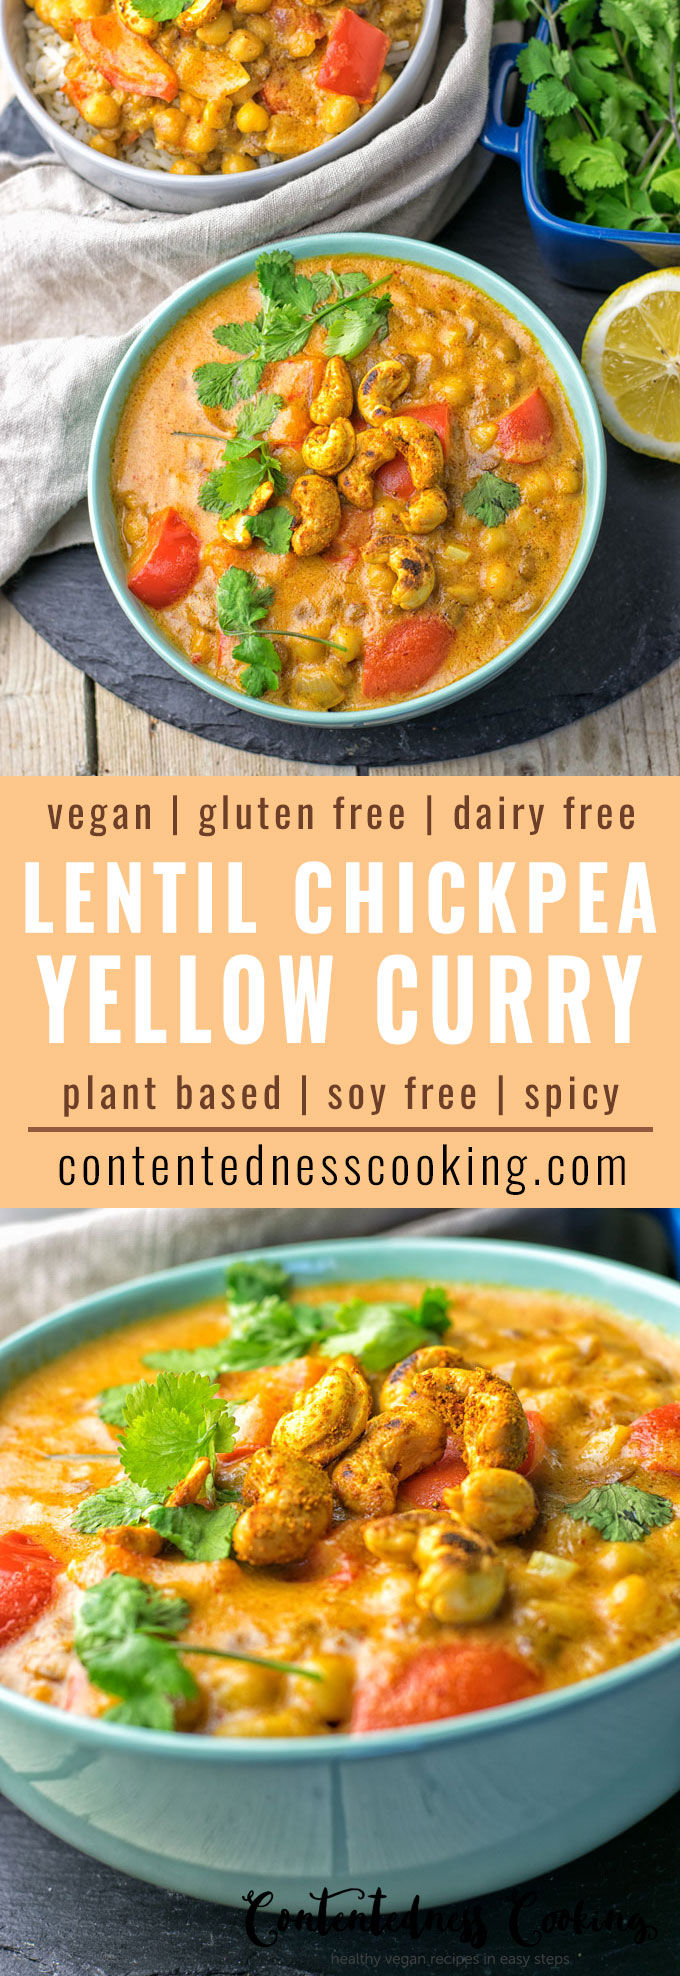 Collage of two pictures of the Lentil Chickpea Yellow Curry with recipe title text.